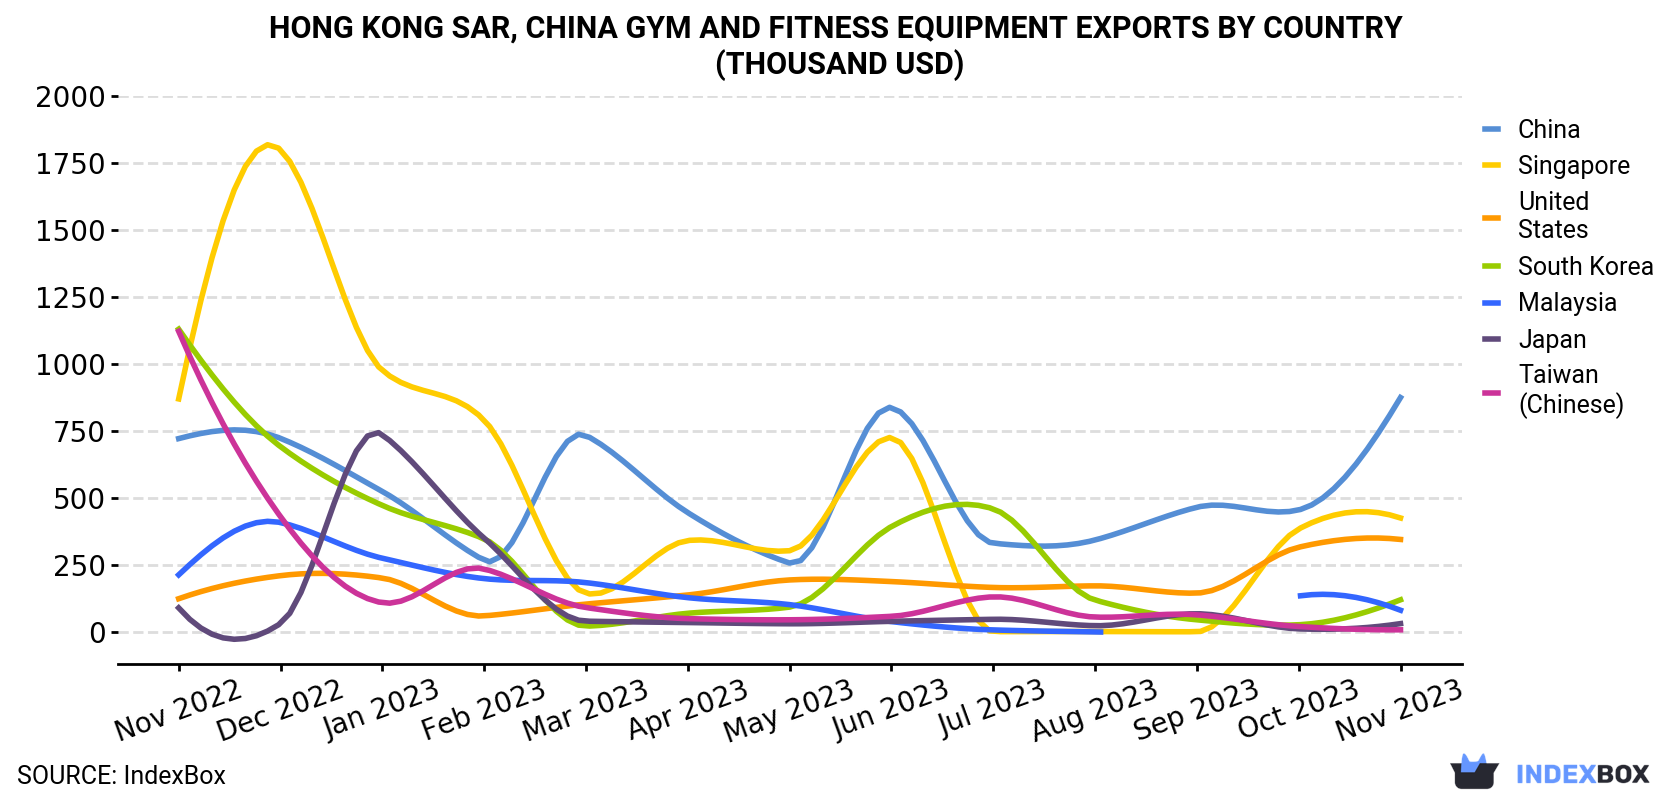 Hong Kong Gym and Fitness Equipment Exports By Country (Thousand USD)